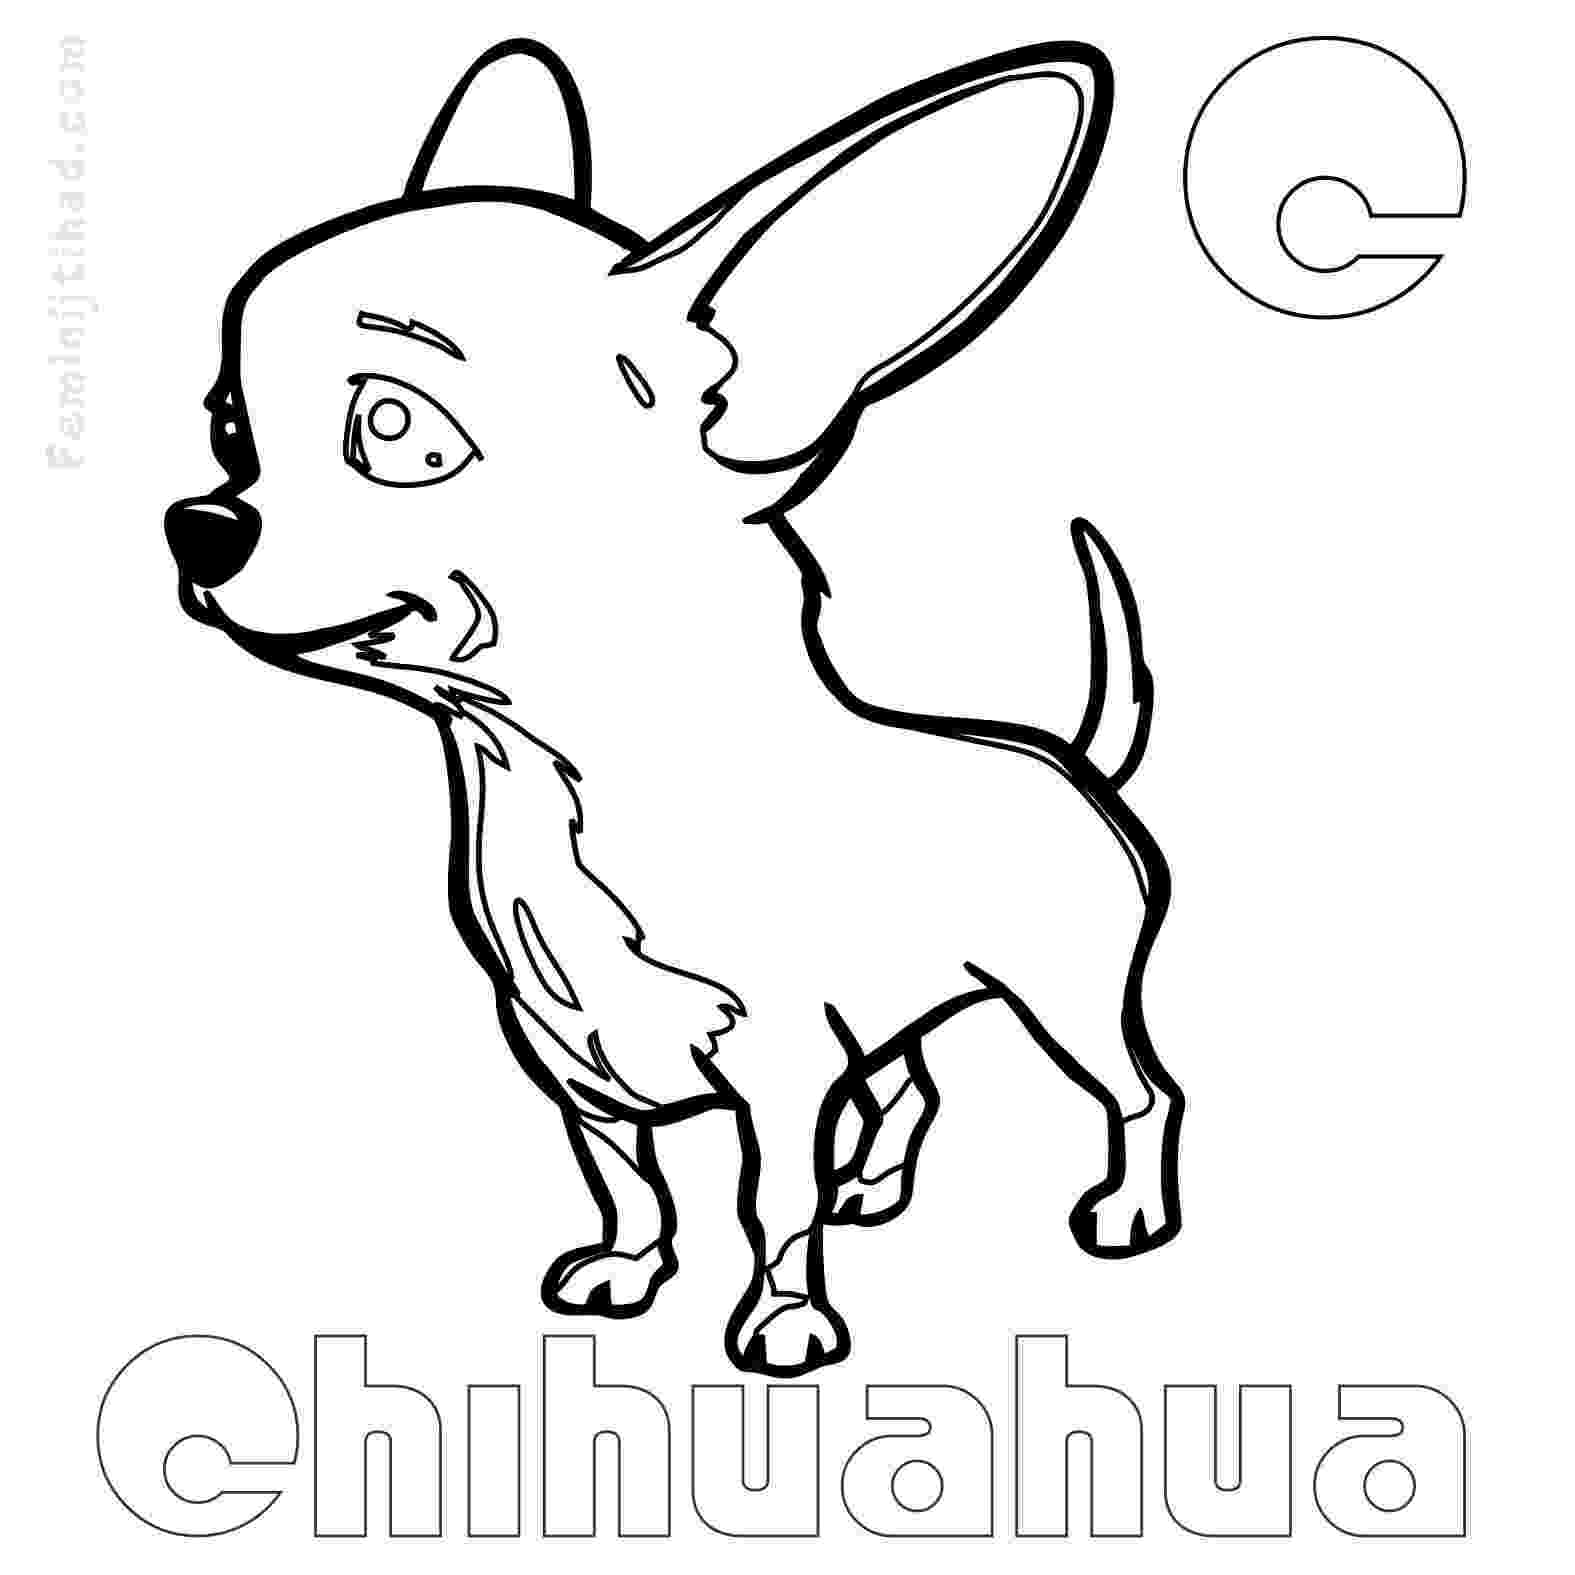 chihuahua pictures to print chihuahua coloring pages pictures chihuahua print to 